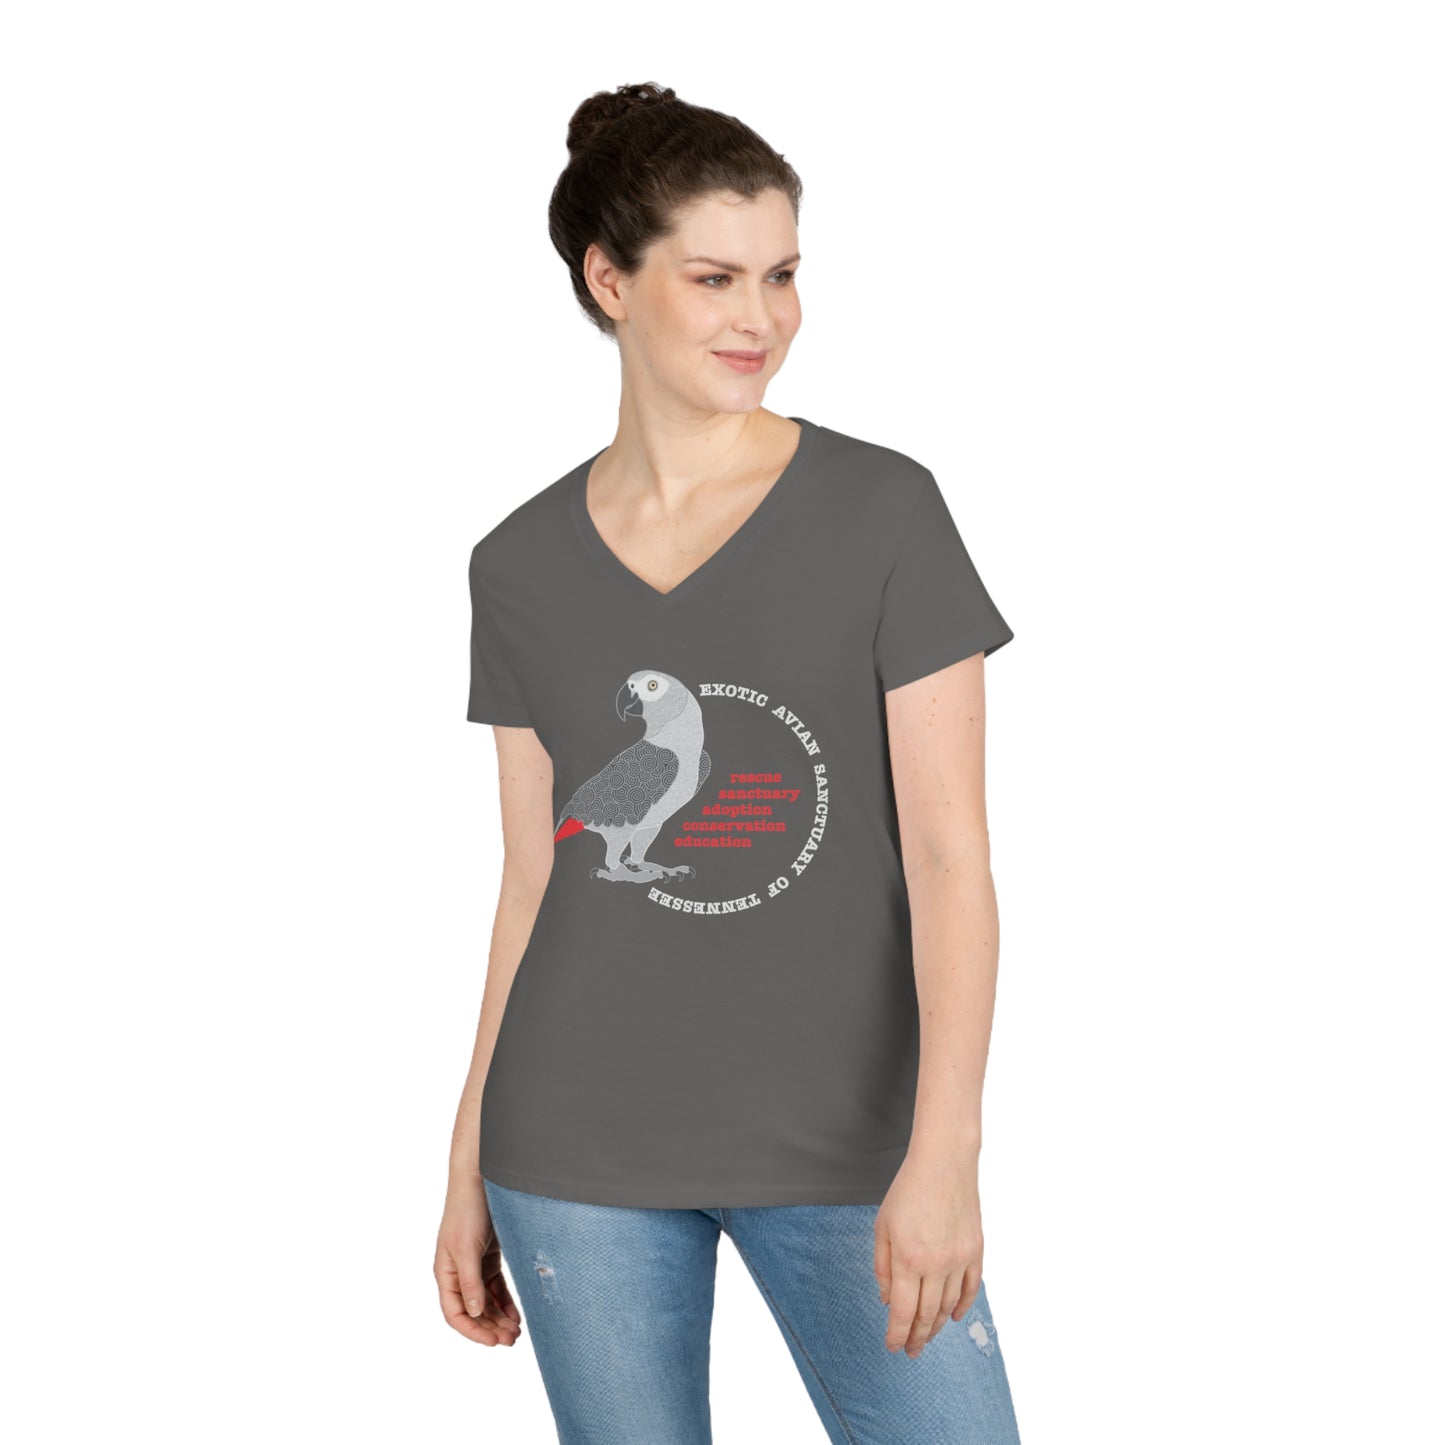 Ladies' EAST African Grey V-Neck T-Shirt